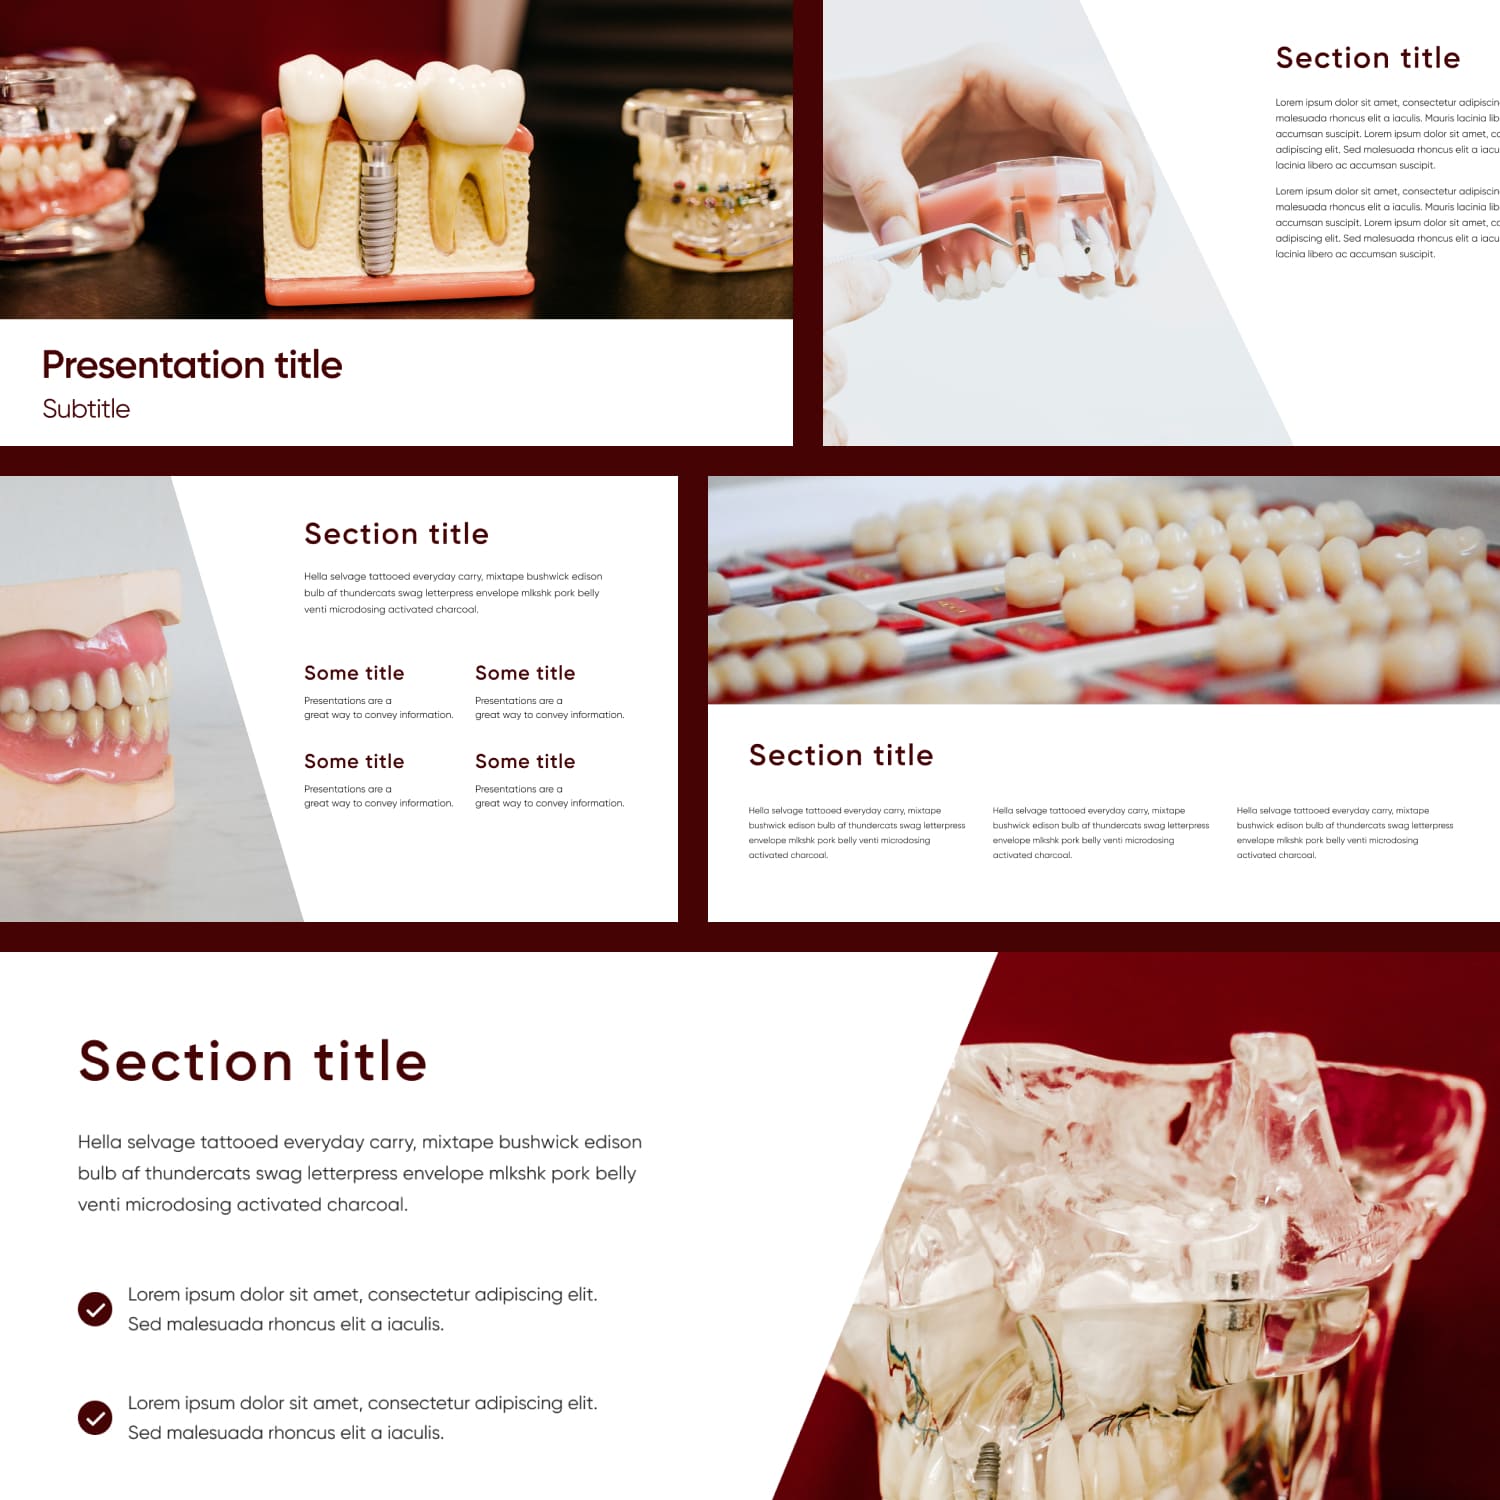 Preview Dental Implants Powerpoint.